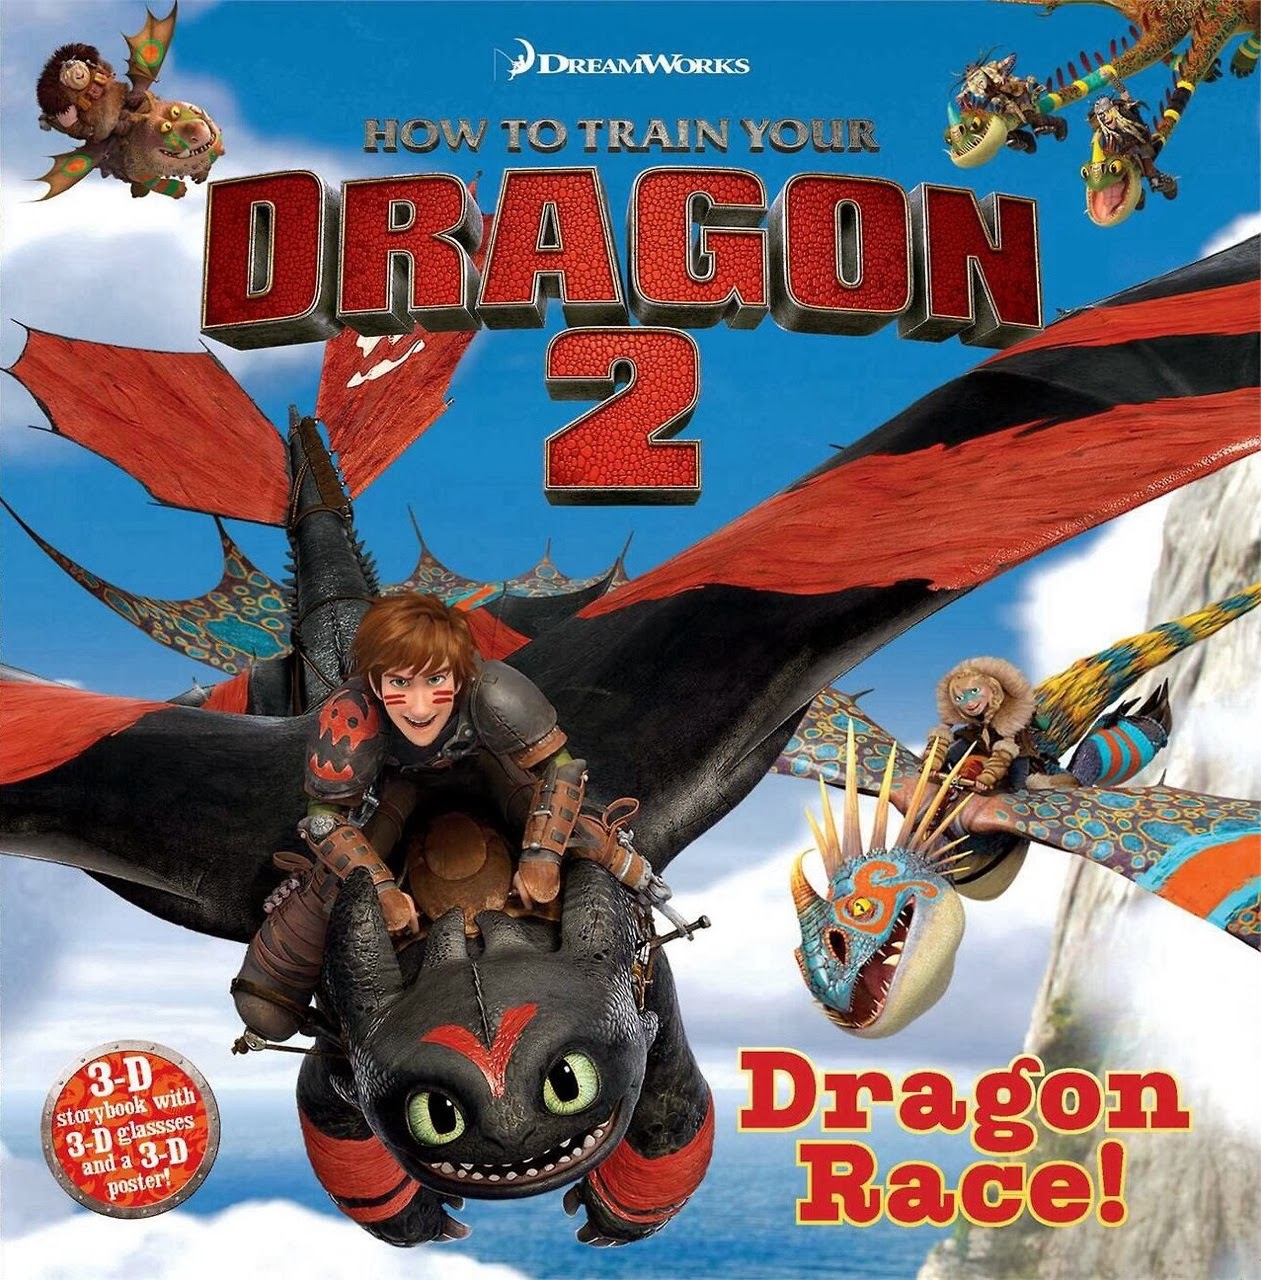 Monde Animation New "Dragons 2 (HTTYD2)" Books are going